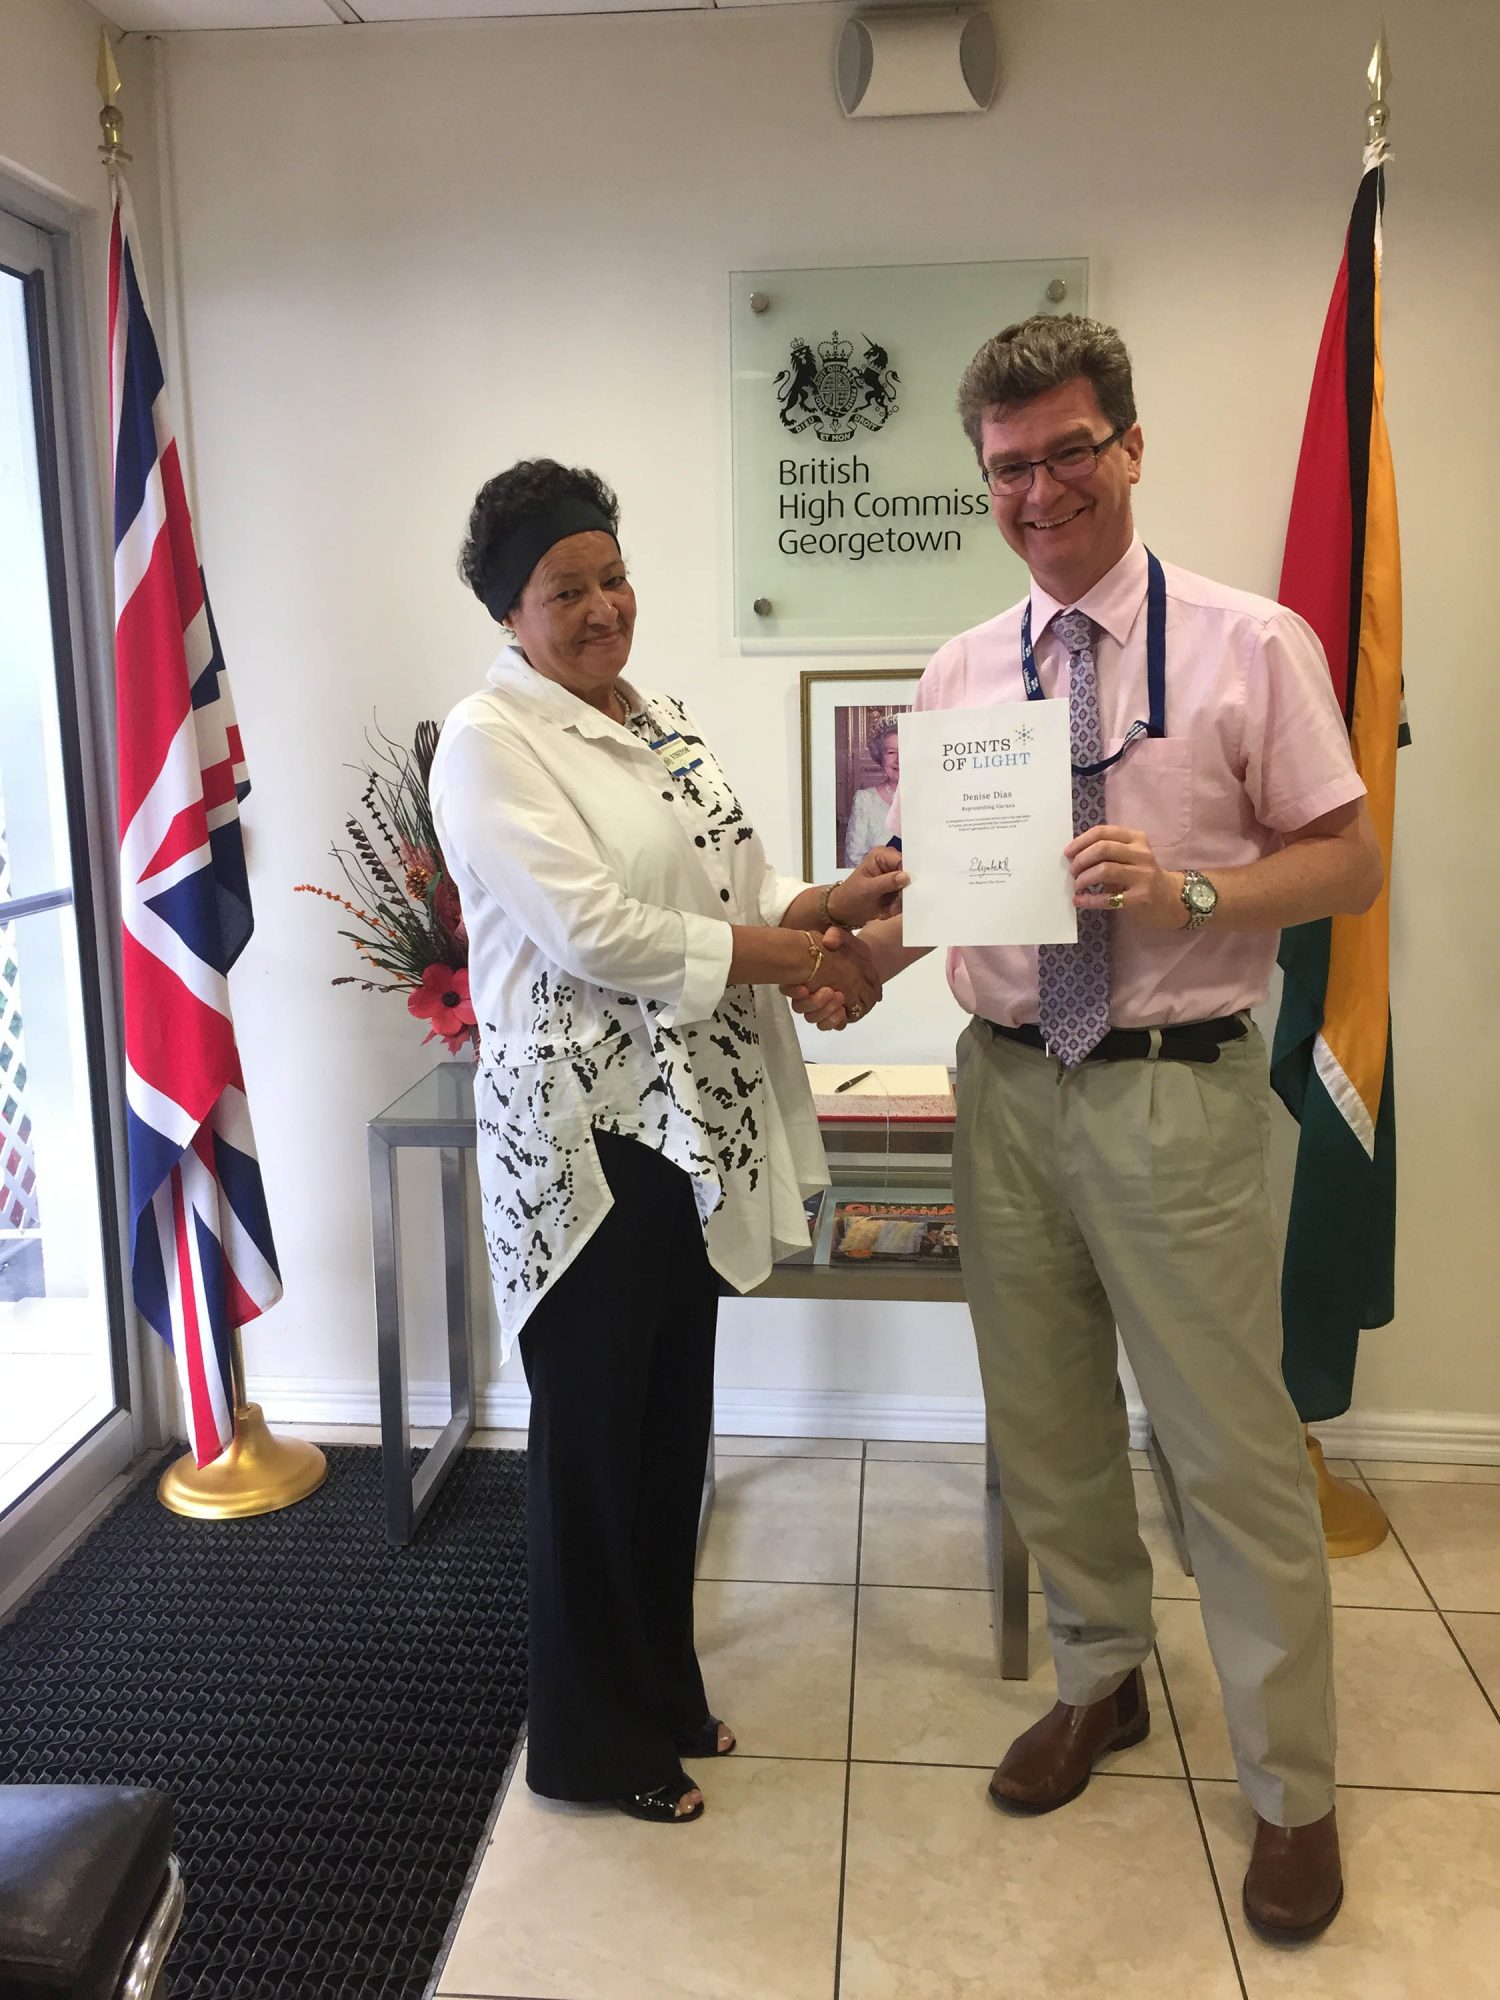 Denise Dias (left) being congratulated by British High Commissioner, Greg Quinn.